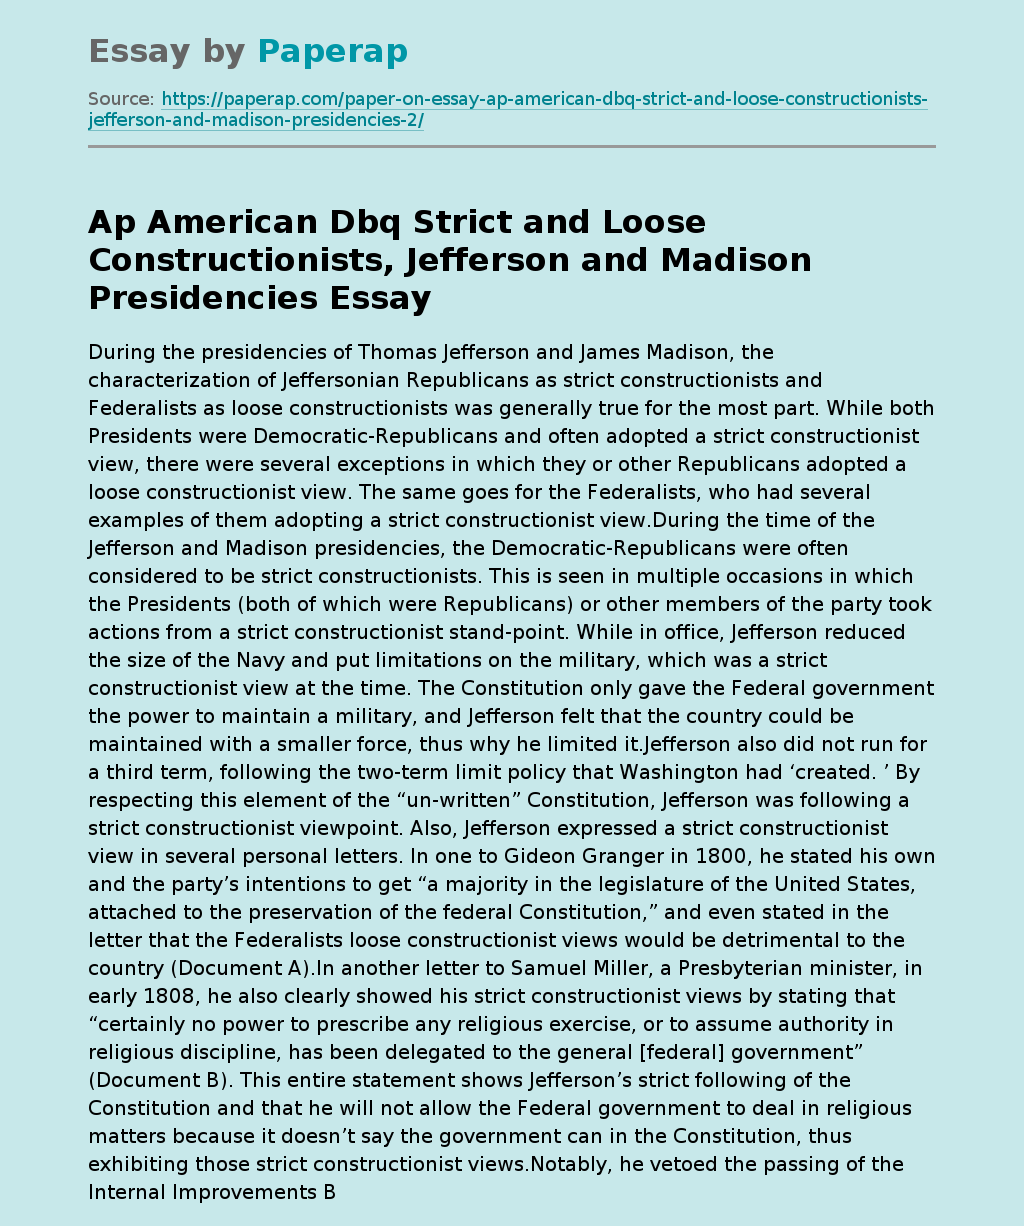 Ap American Dbq Strict and Loose Constructionists, Jefferson and Madison Presidencies